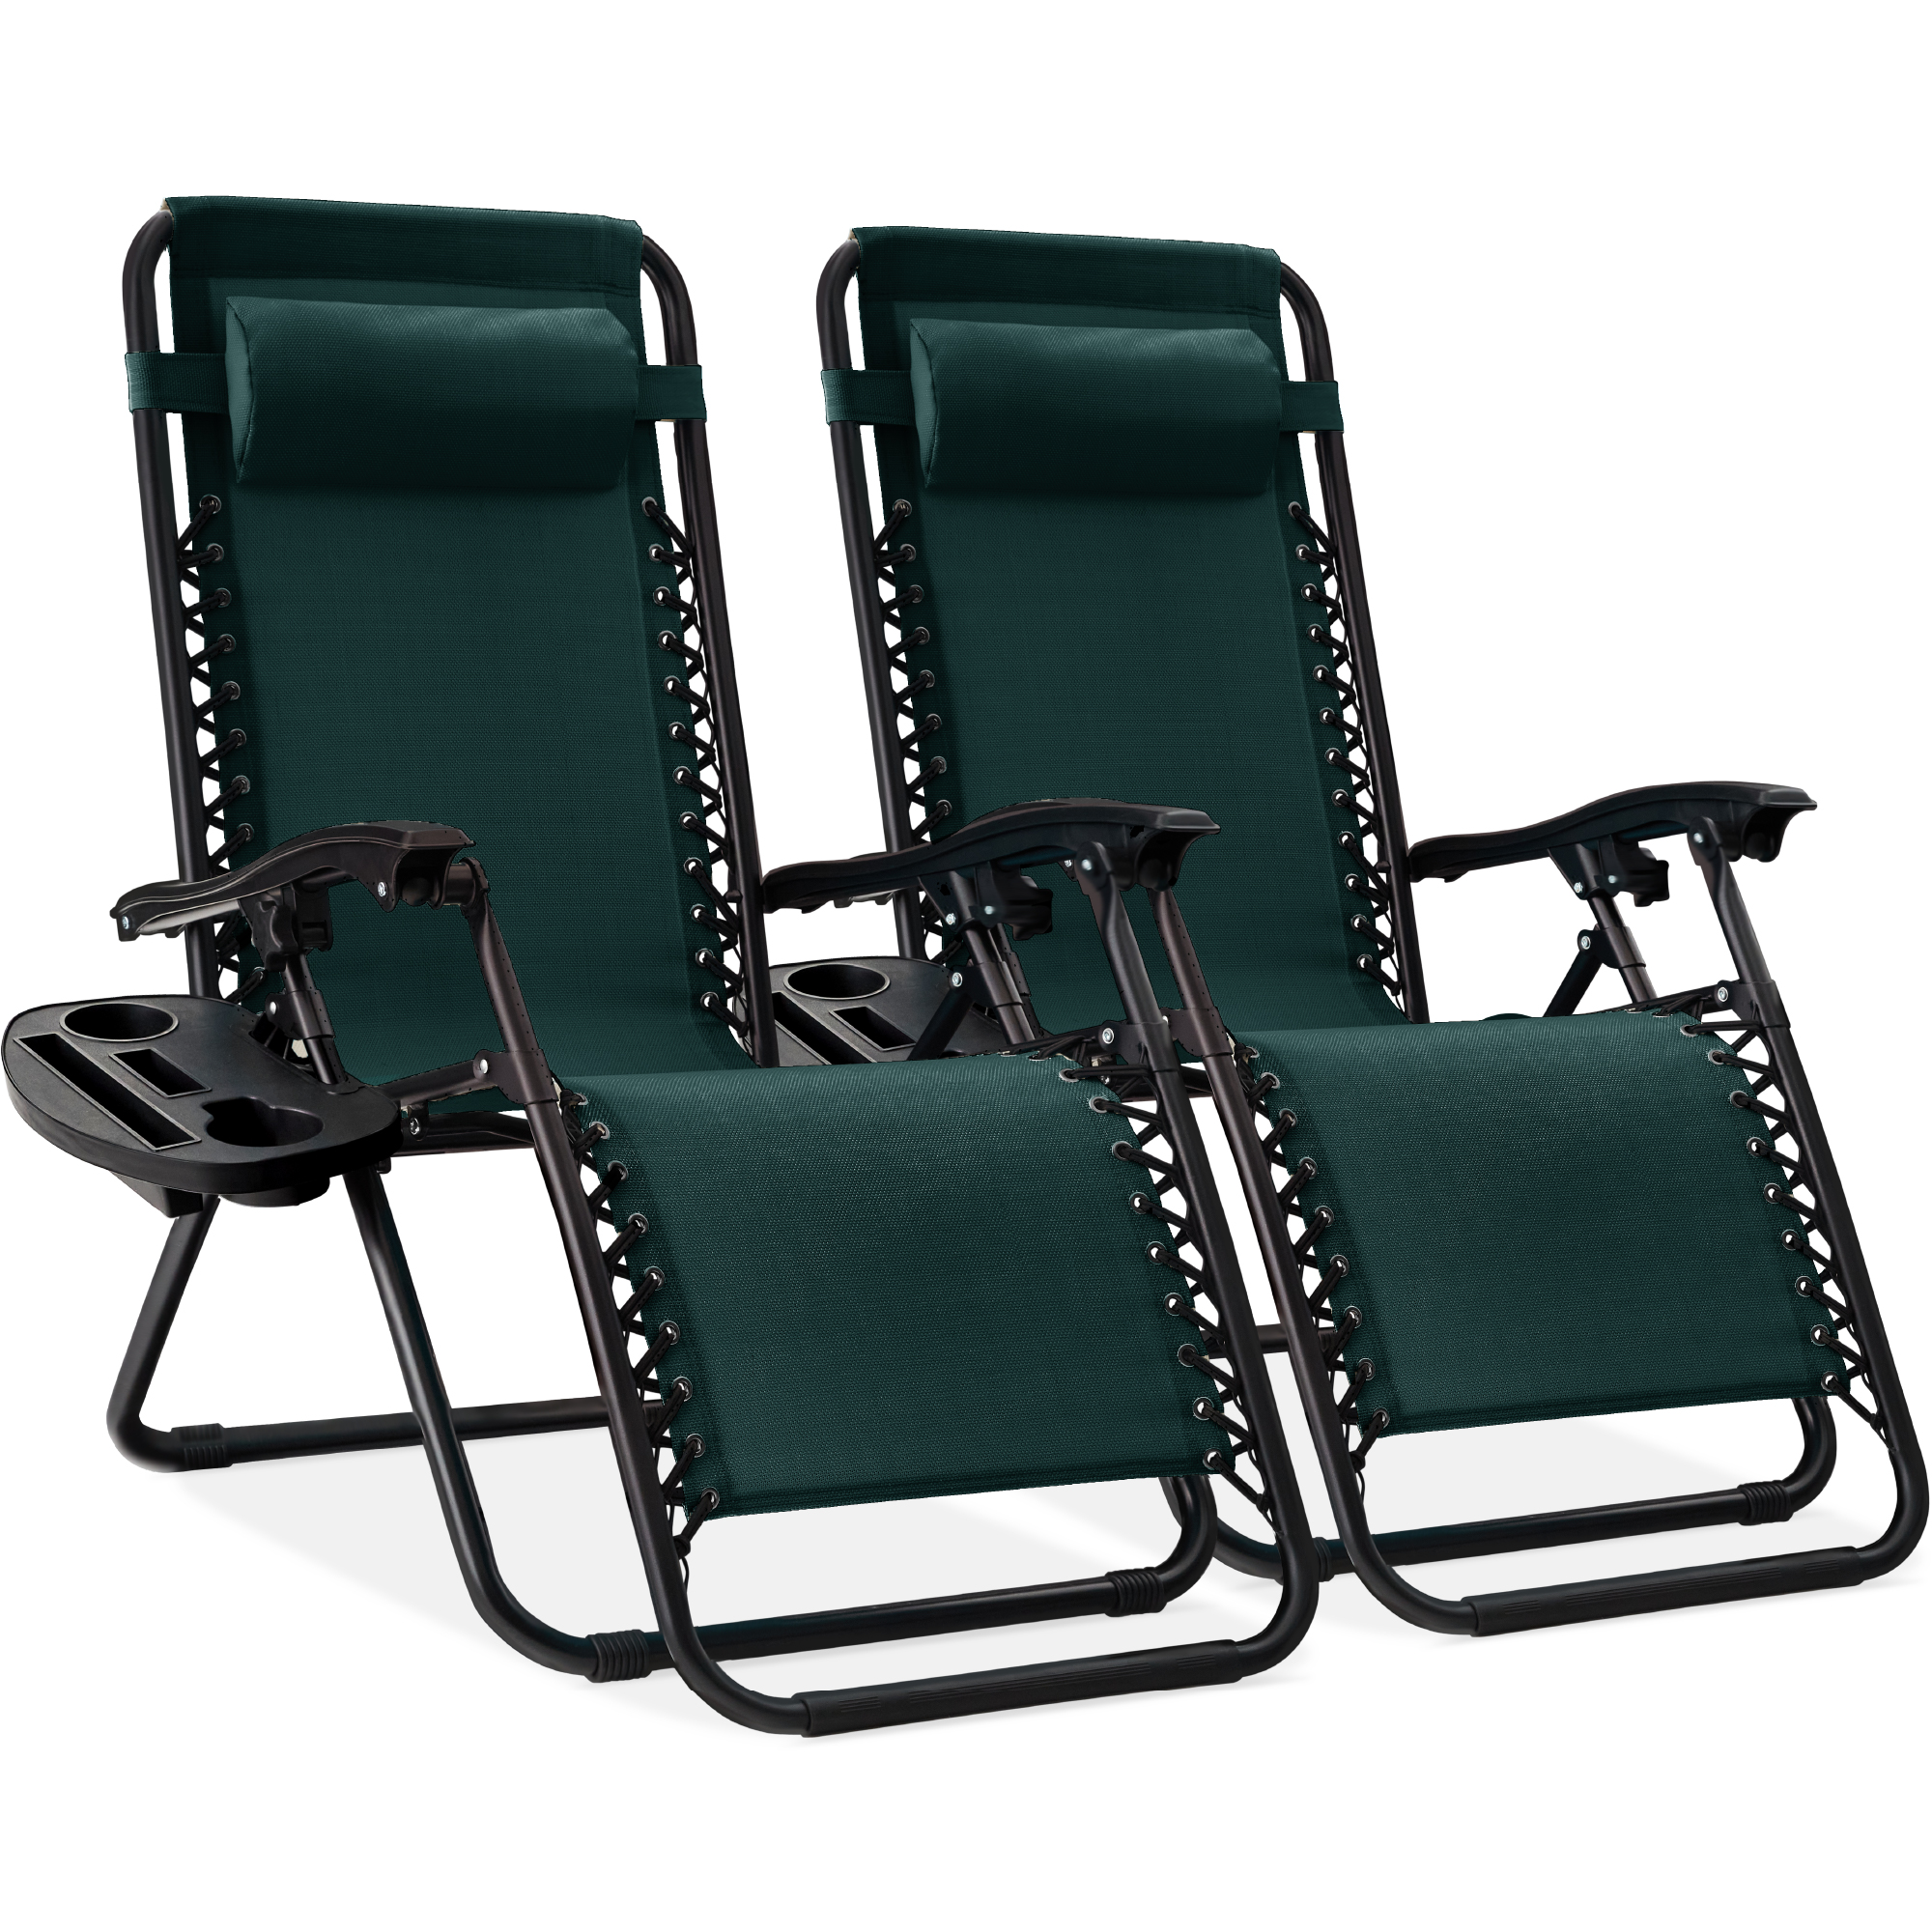 Best Choice Products Set of 2 Zero Gravity Lounge Chair Recliners for Patio, Pool w/ Cup Holder Tray - Forest Green - image 1 of 8